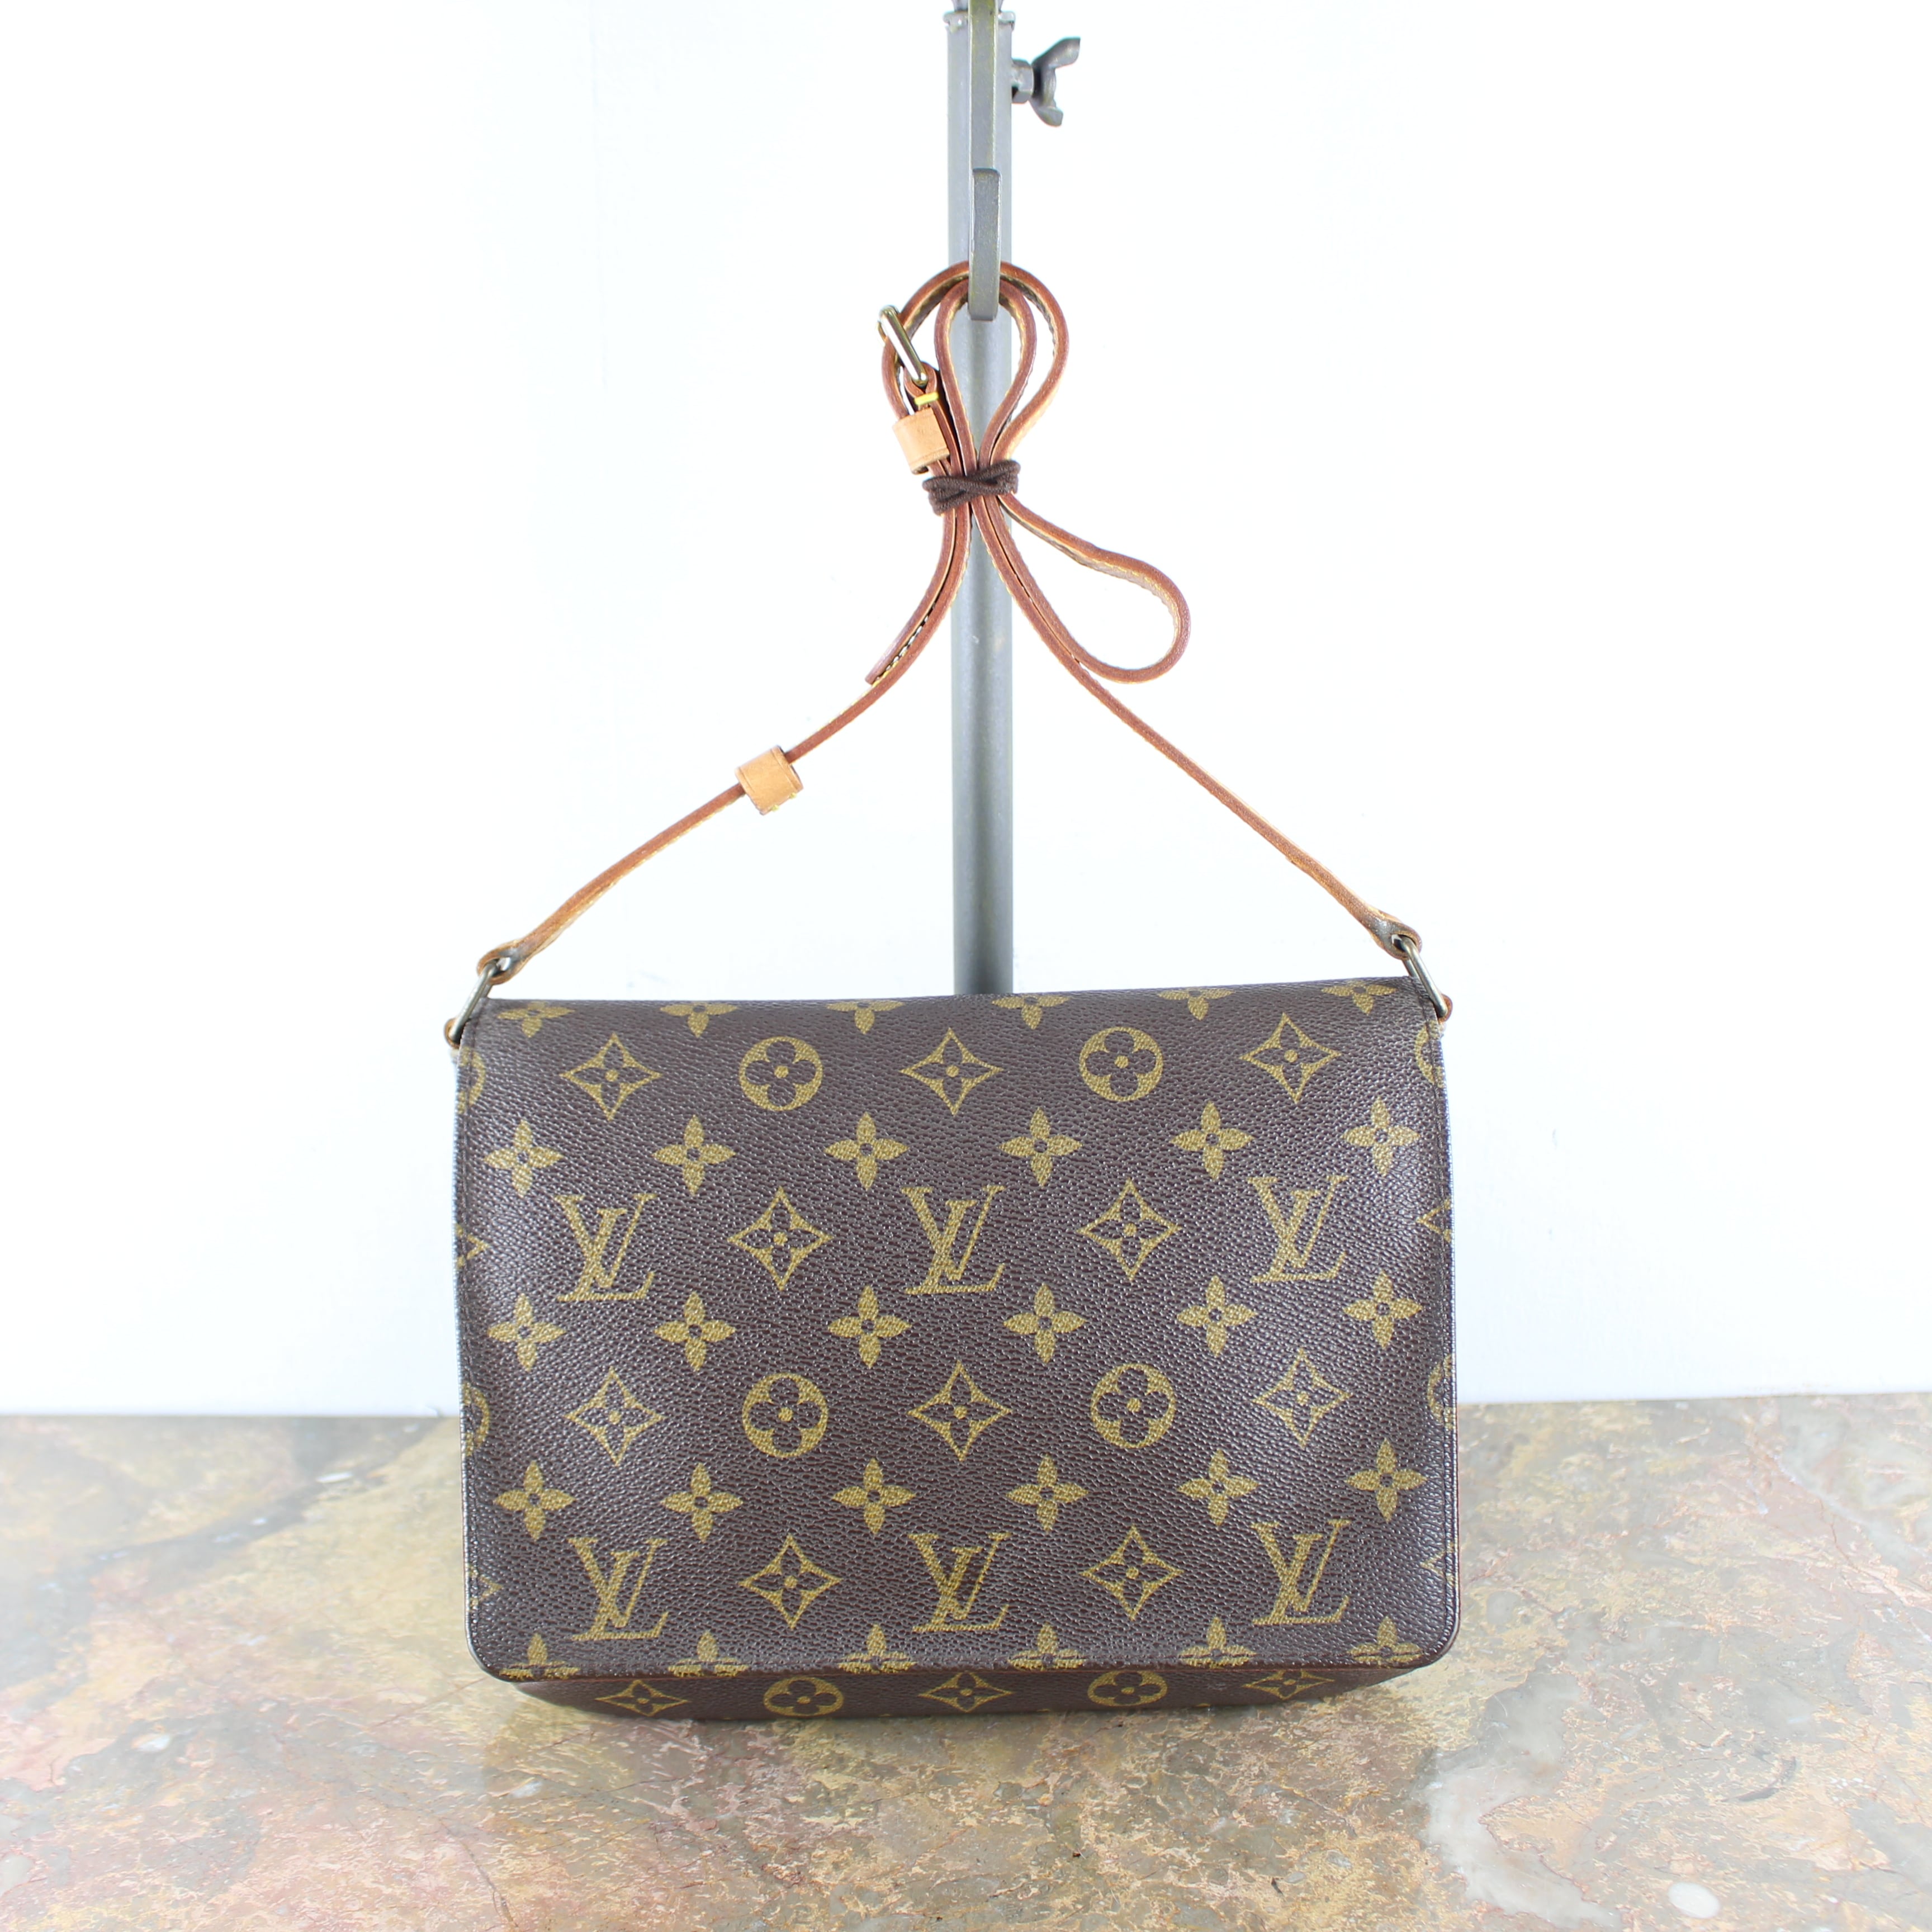 LOUIS VUITTON M51257 SP0041 MONOGRAM PATTERNED SHOULDER BAG MADE IN FRANCE/ ルイヴィトンミュゼットタンゴモノグラム柄ショルダーバッグ2000000053097 | Titti Vintage